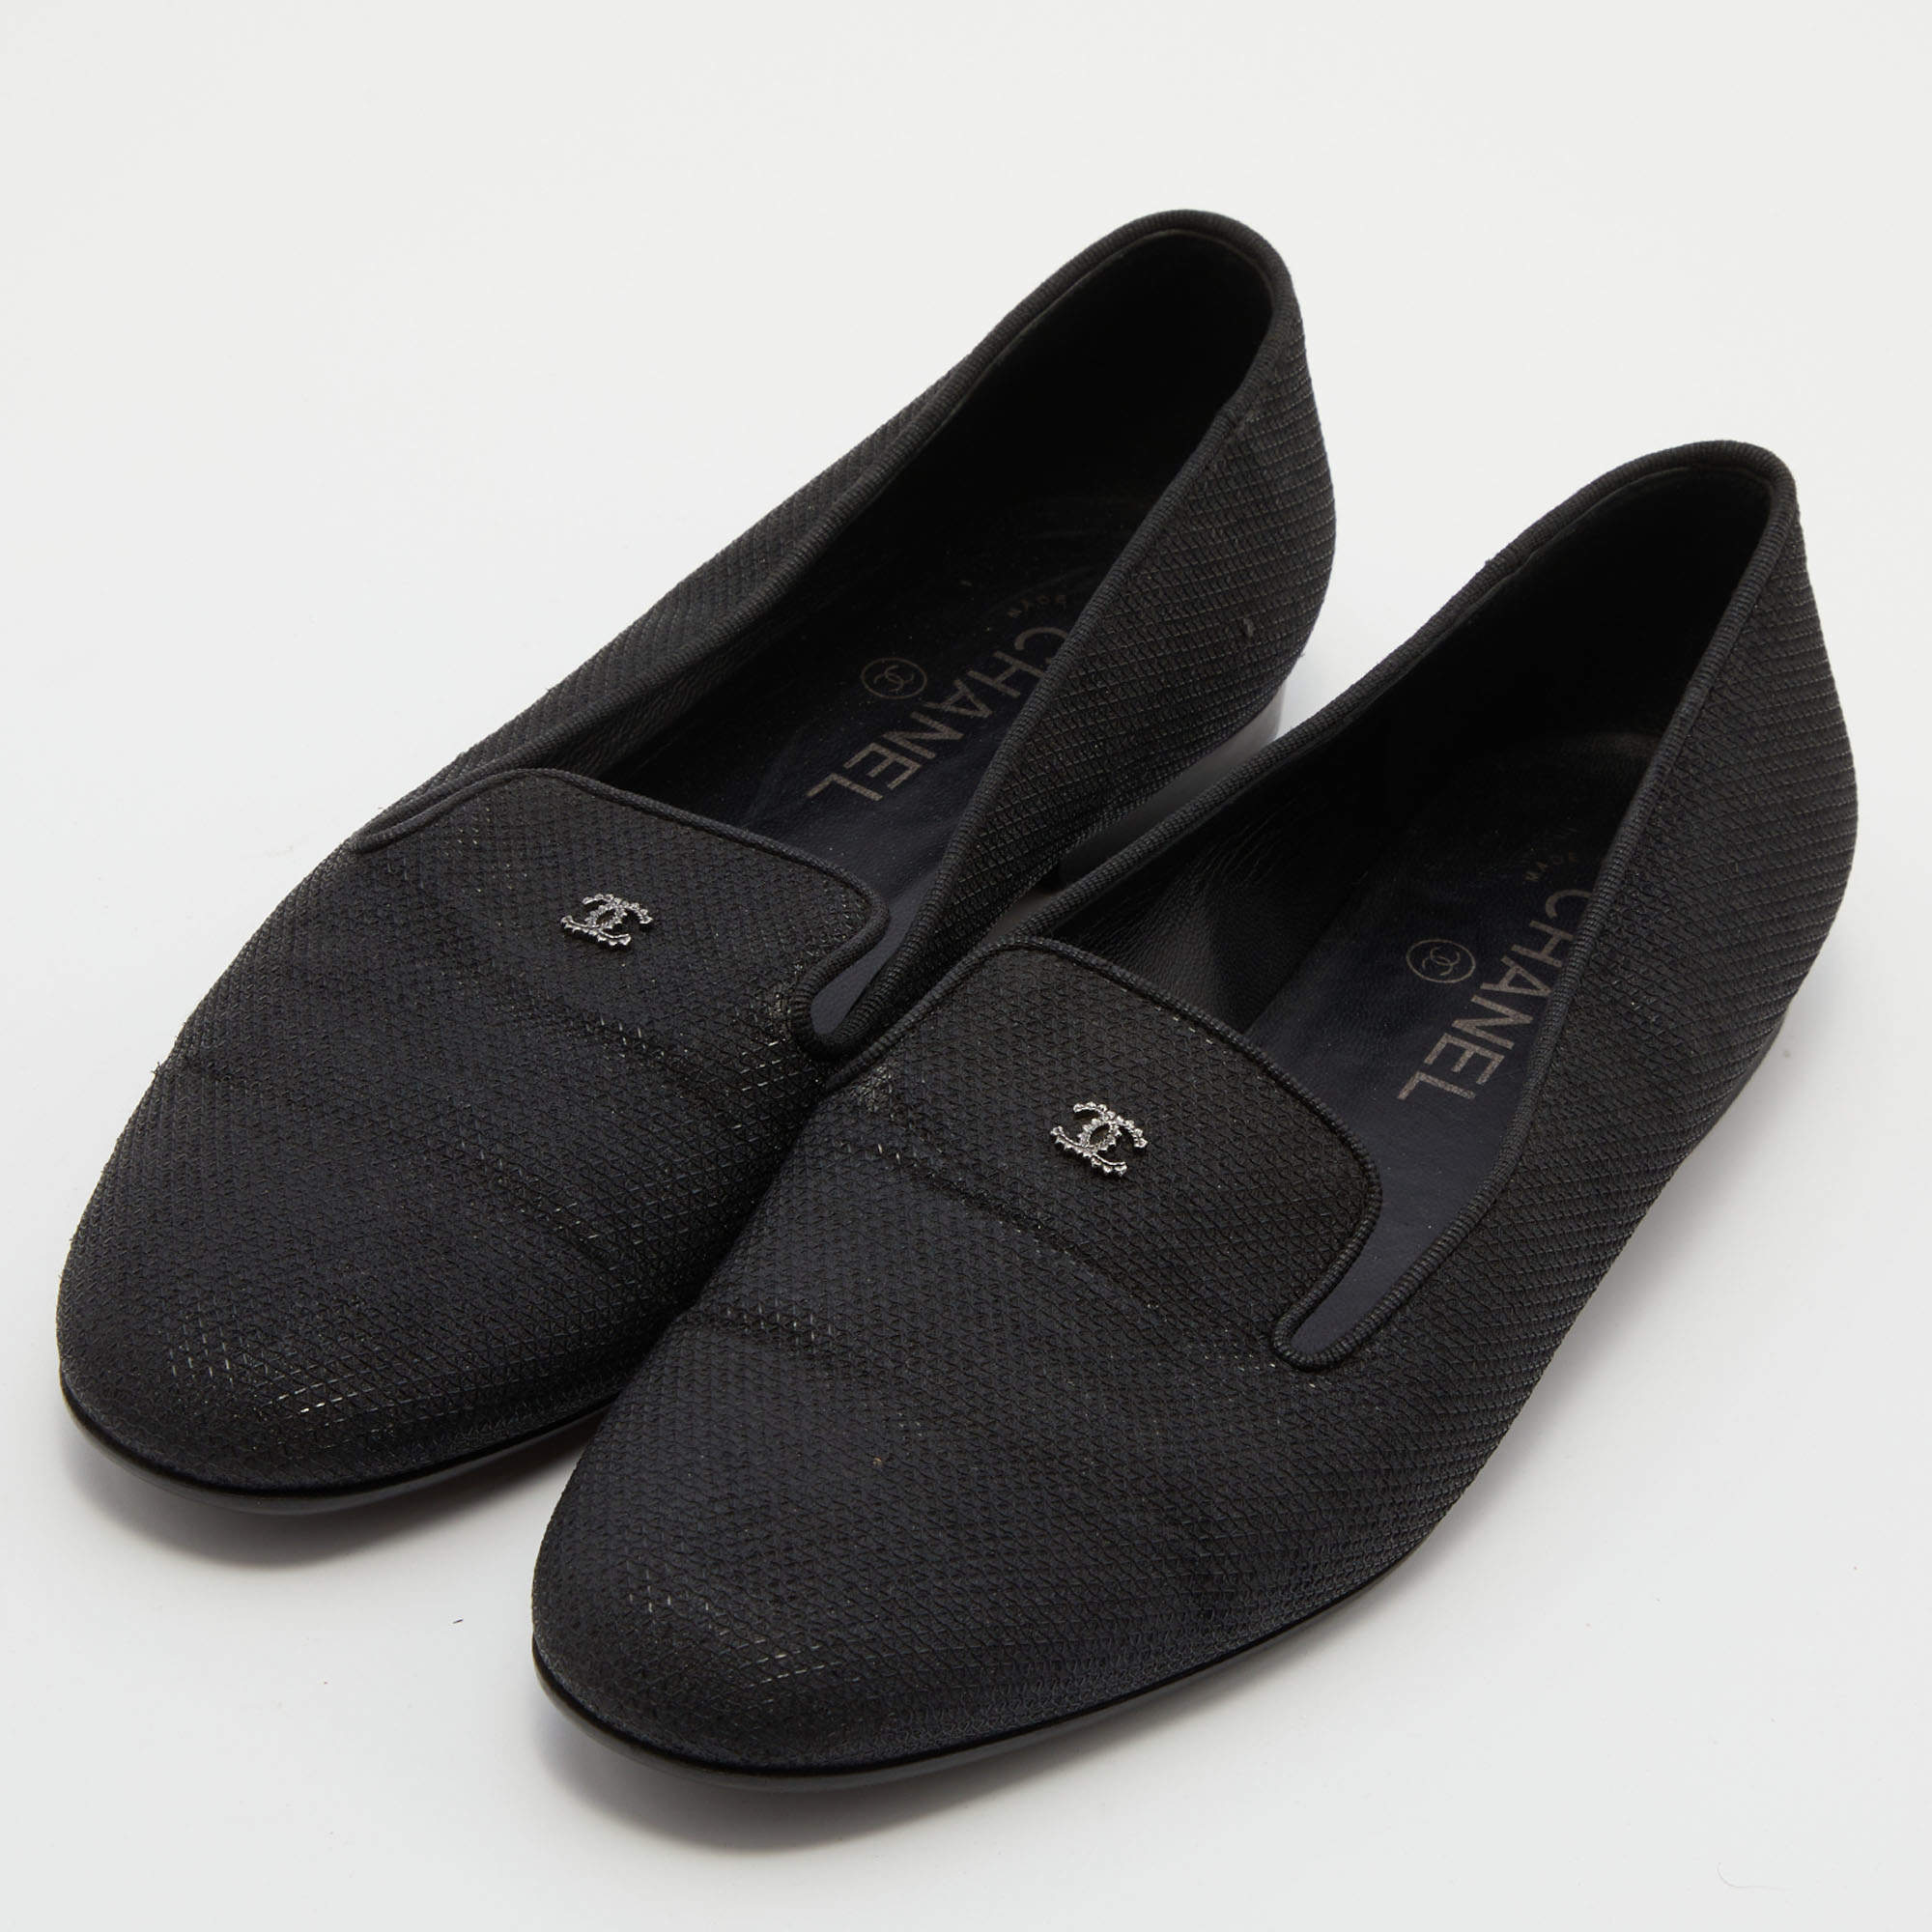 Chanel Black Fabric CC Slip On Smoking Slippers Size 39.5 Chanel